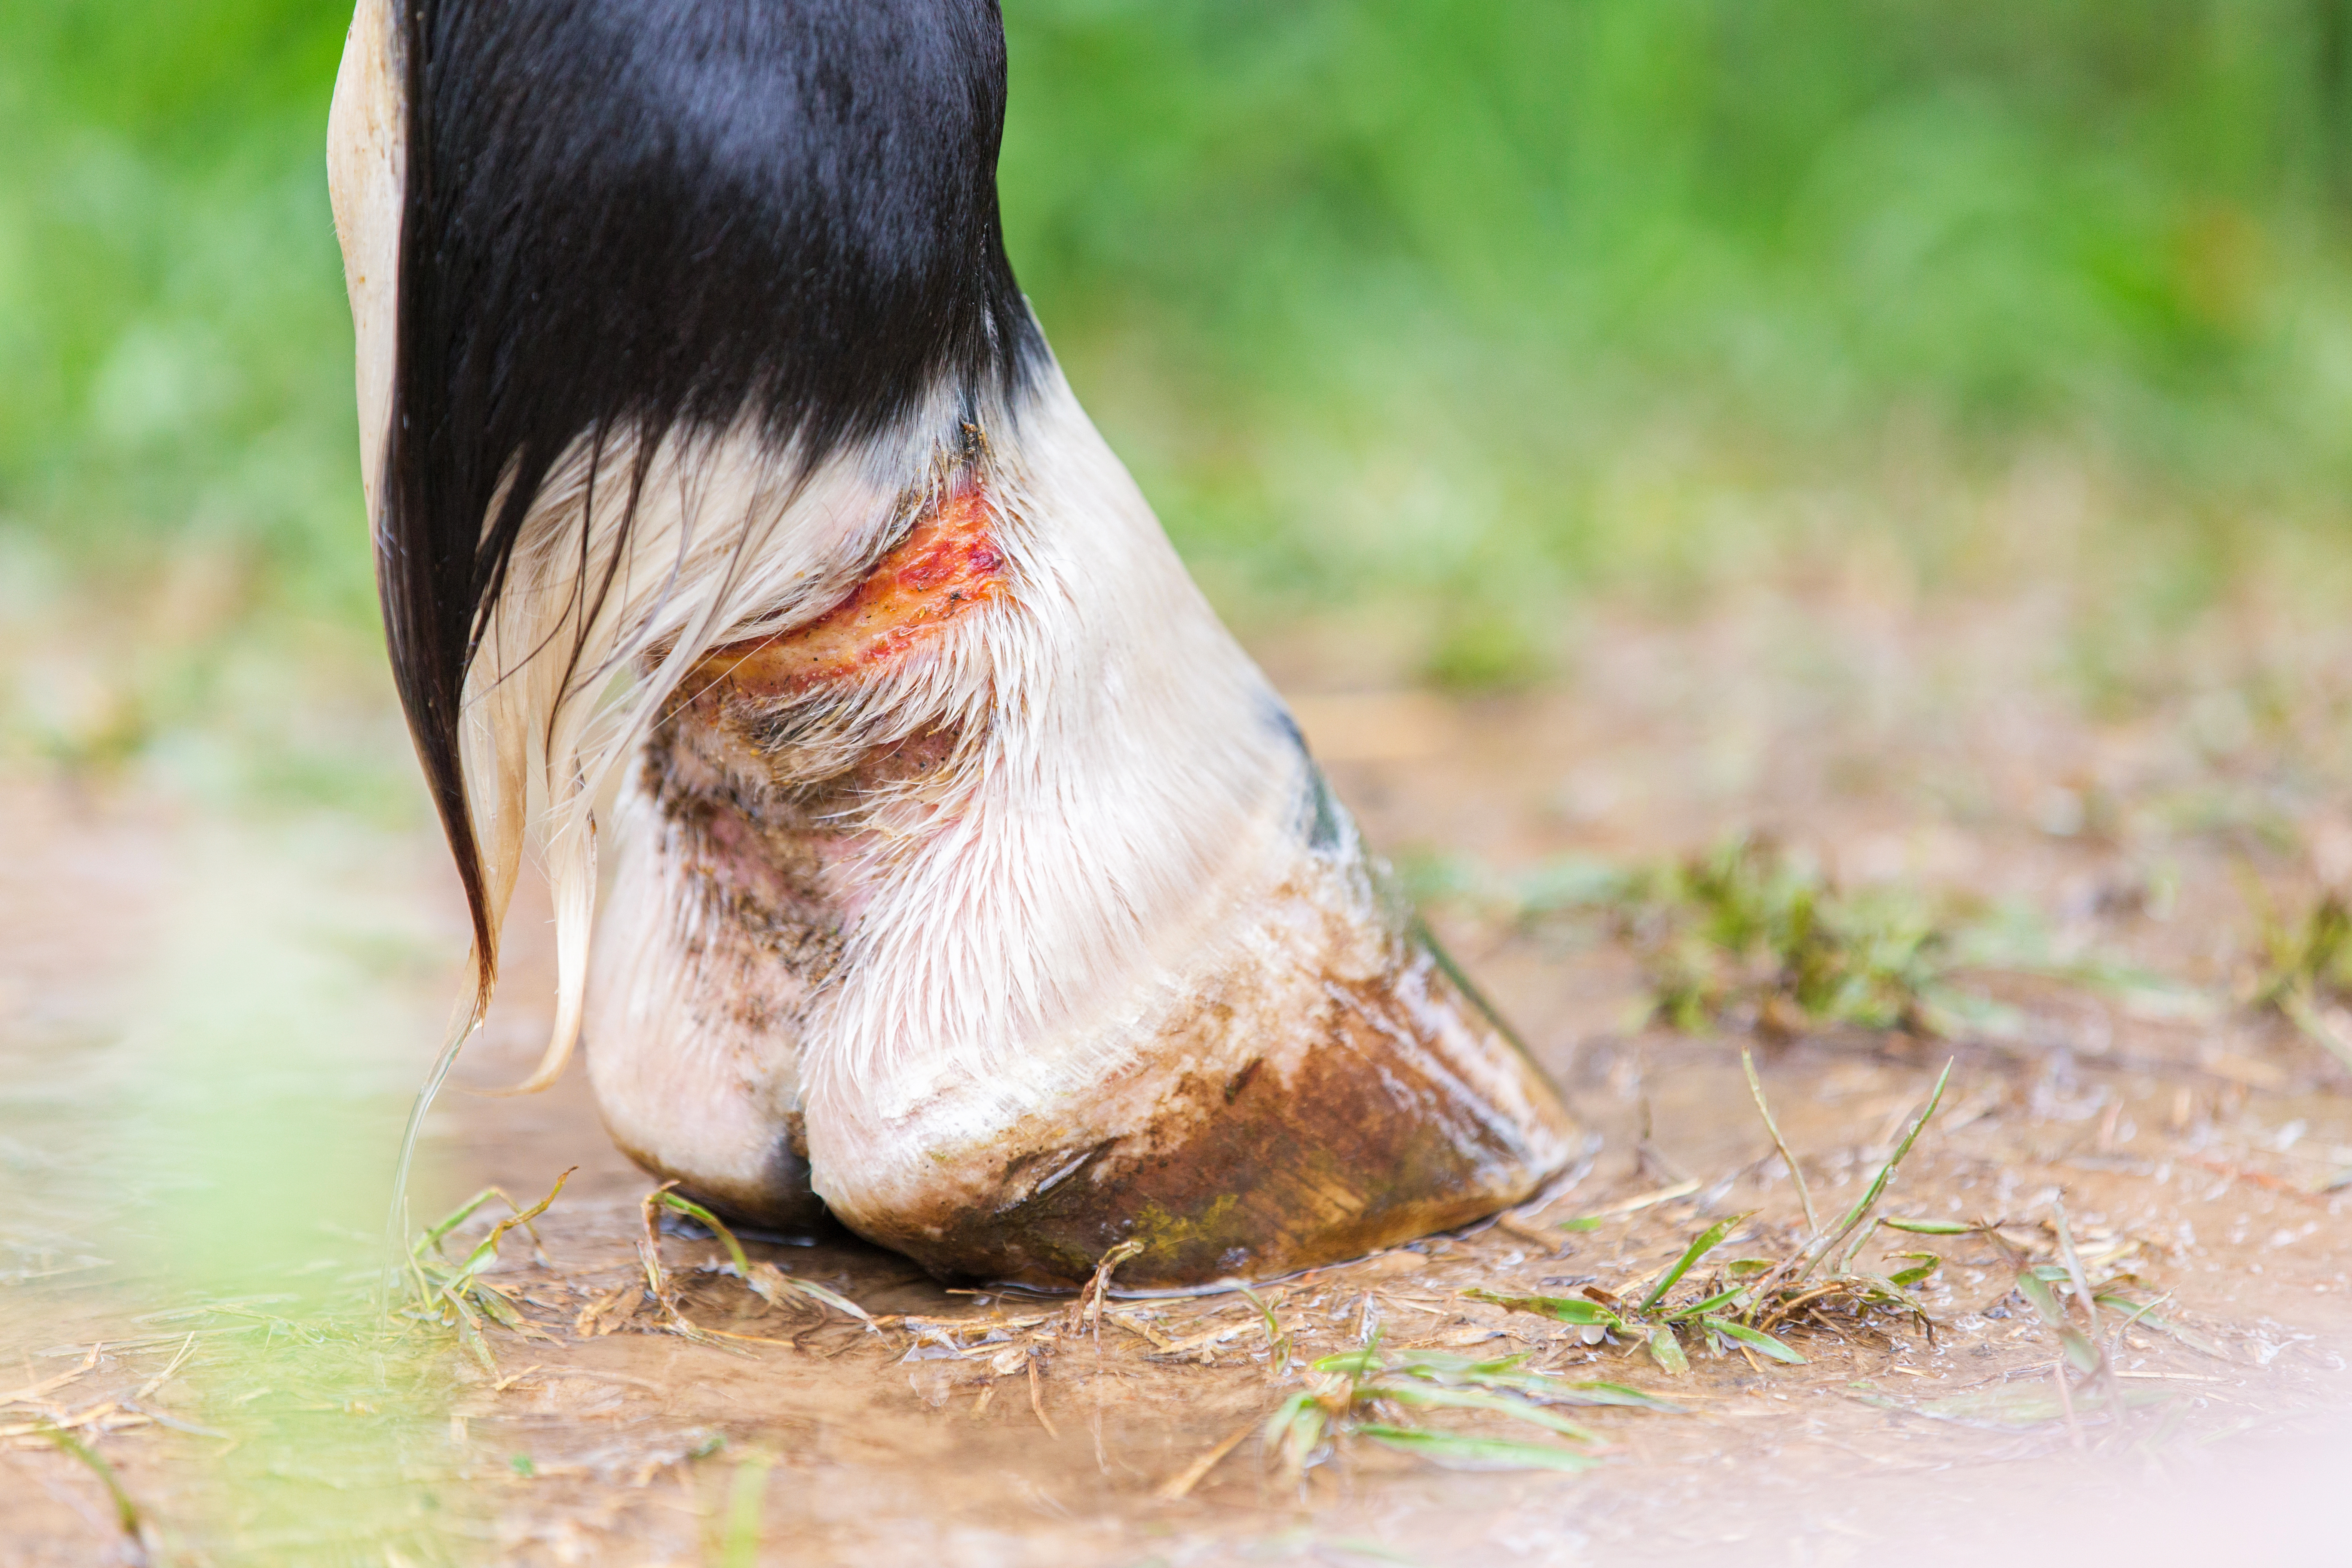 The back of a horse's fetlock with a large cut on it